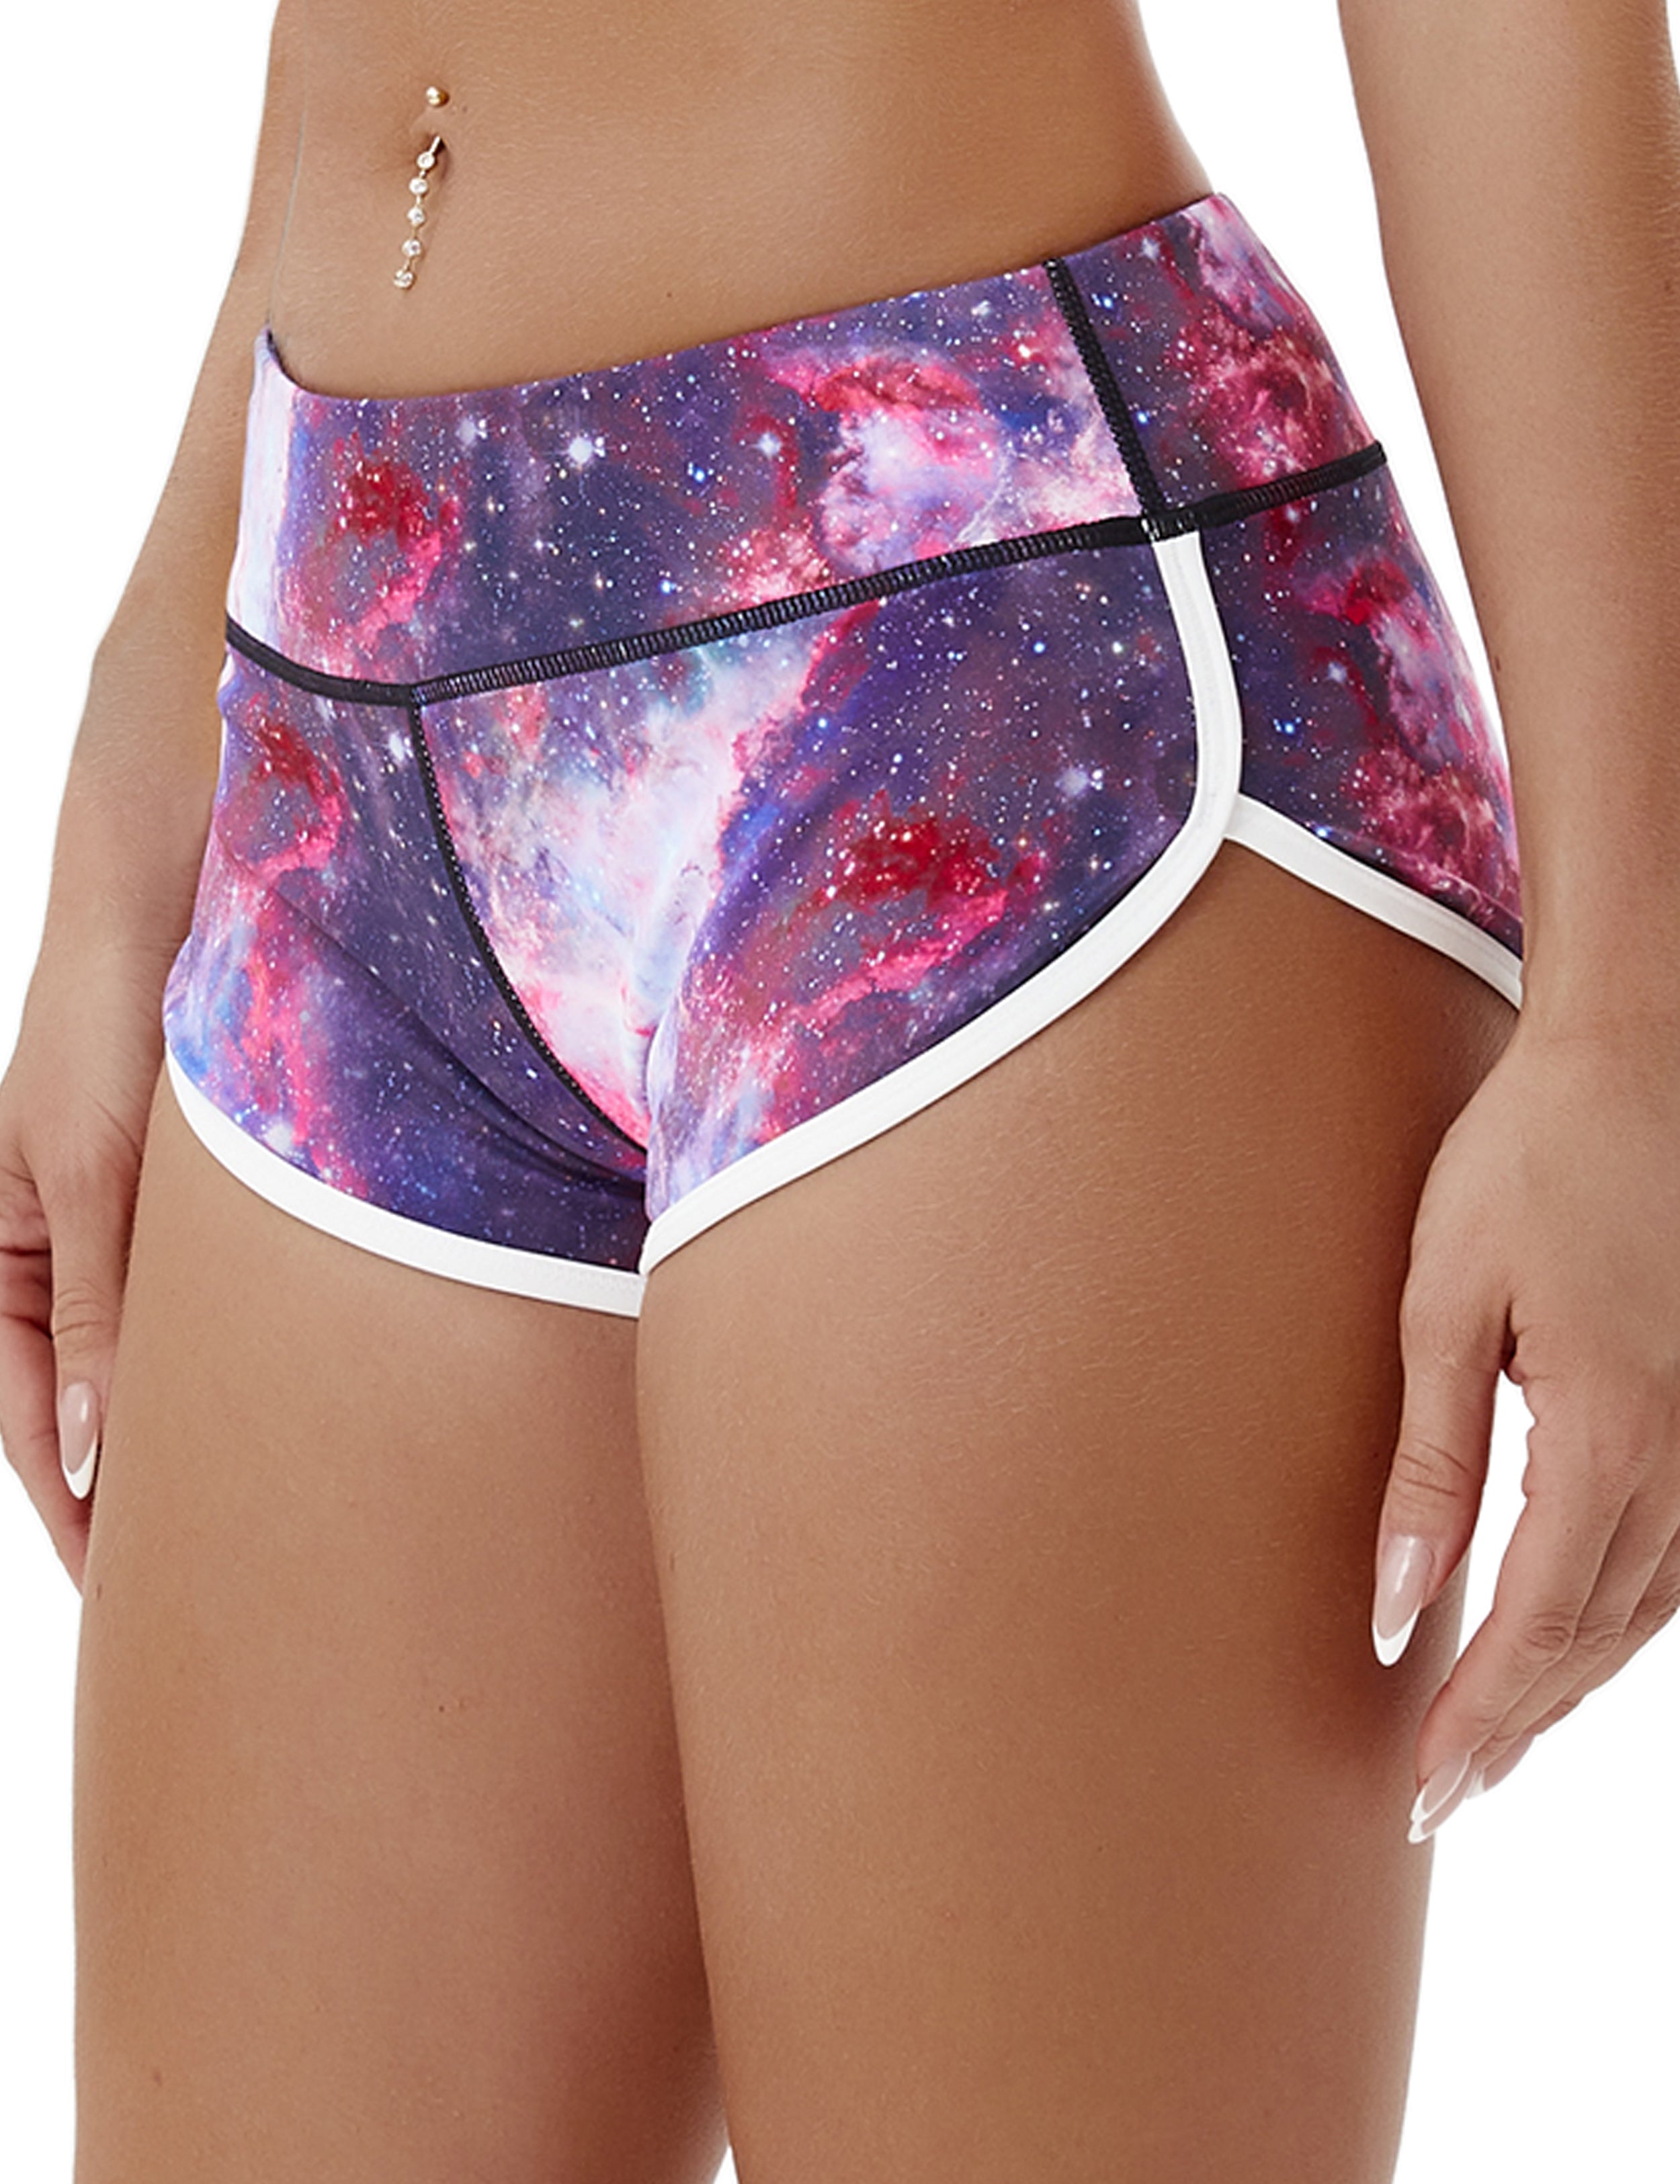 Printed Booty Gym Shorts galaxy Sleek, soft, smooth and totally comfortable: our newest sexy style is here. Softest-ever fabric High elasticity High density 4-way stretch Fabric doesn't attract lint easily No see-through Moisture-wicking Machine wash 78% Polyester, 22% Spandex